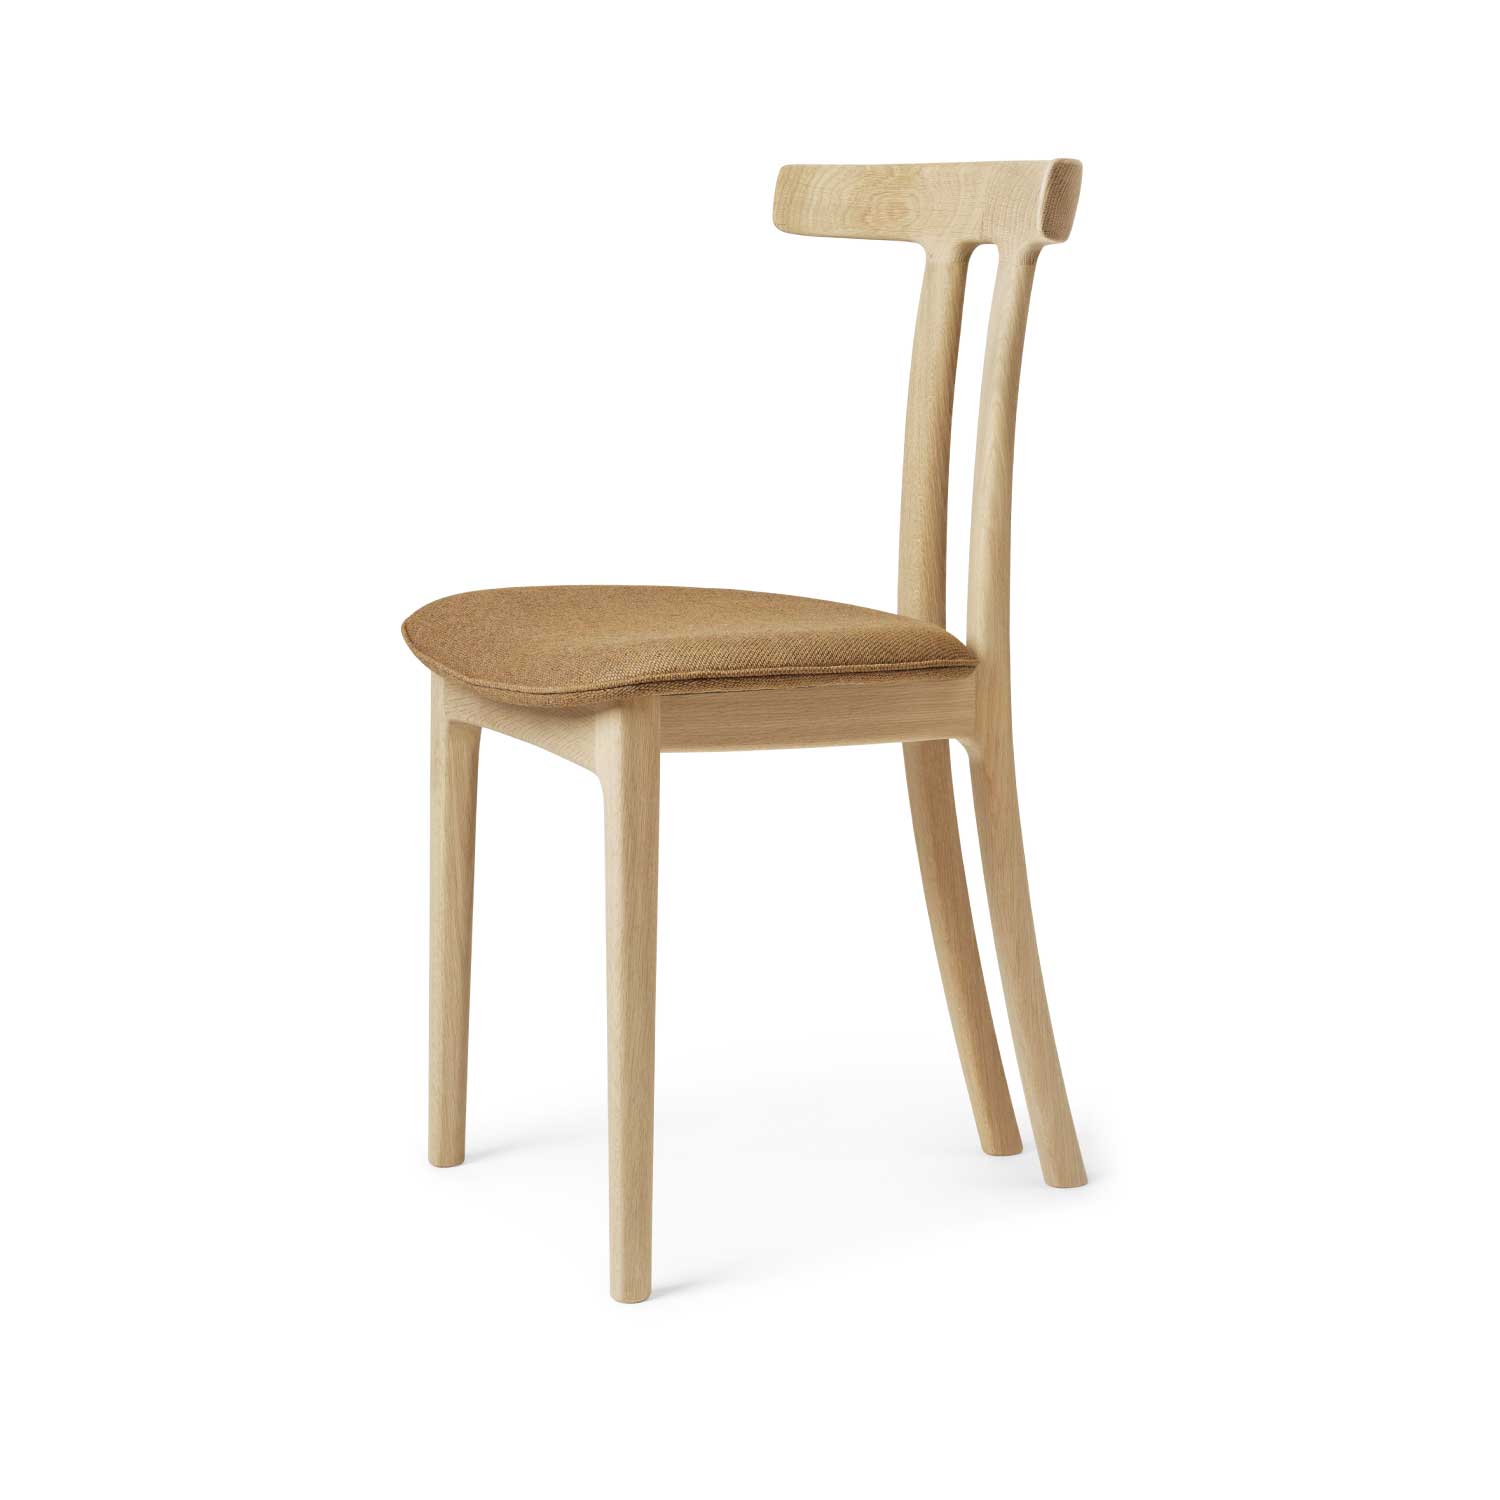 OW58 | T-CHAIR - オーク材